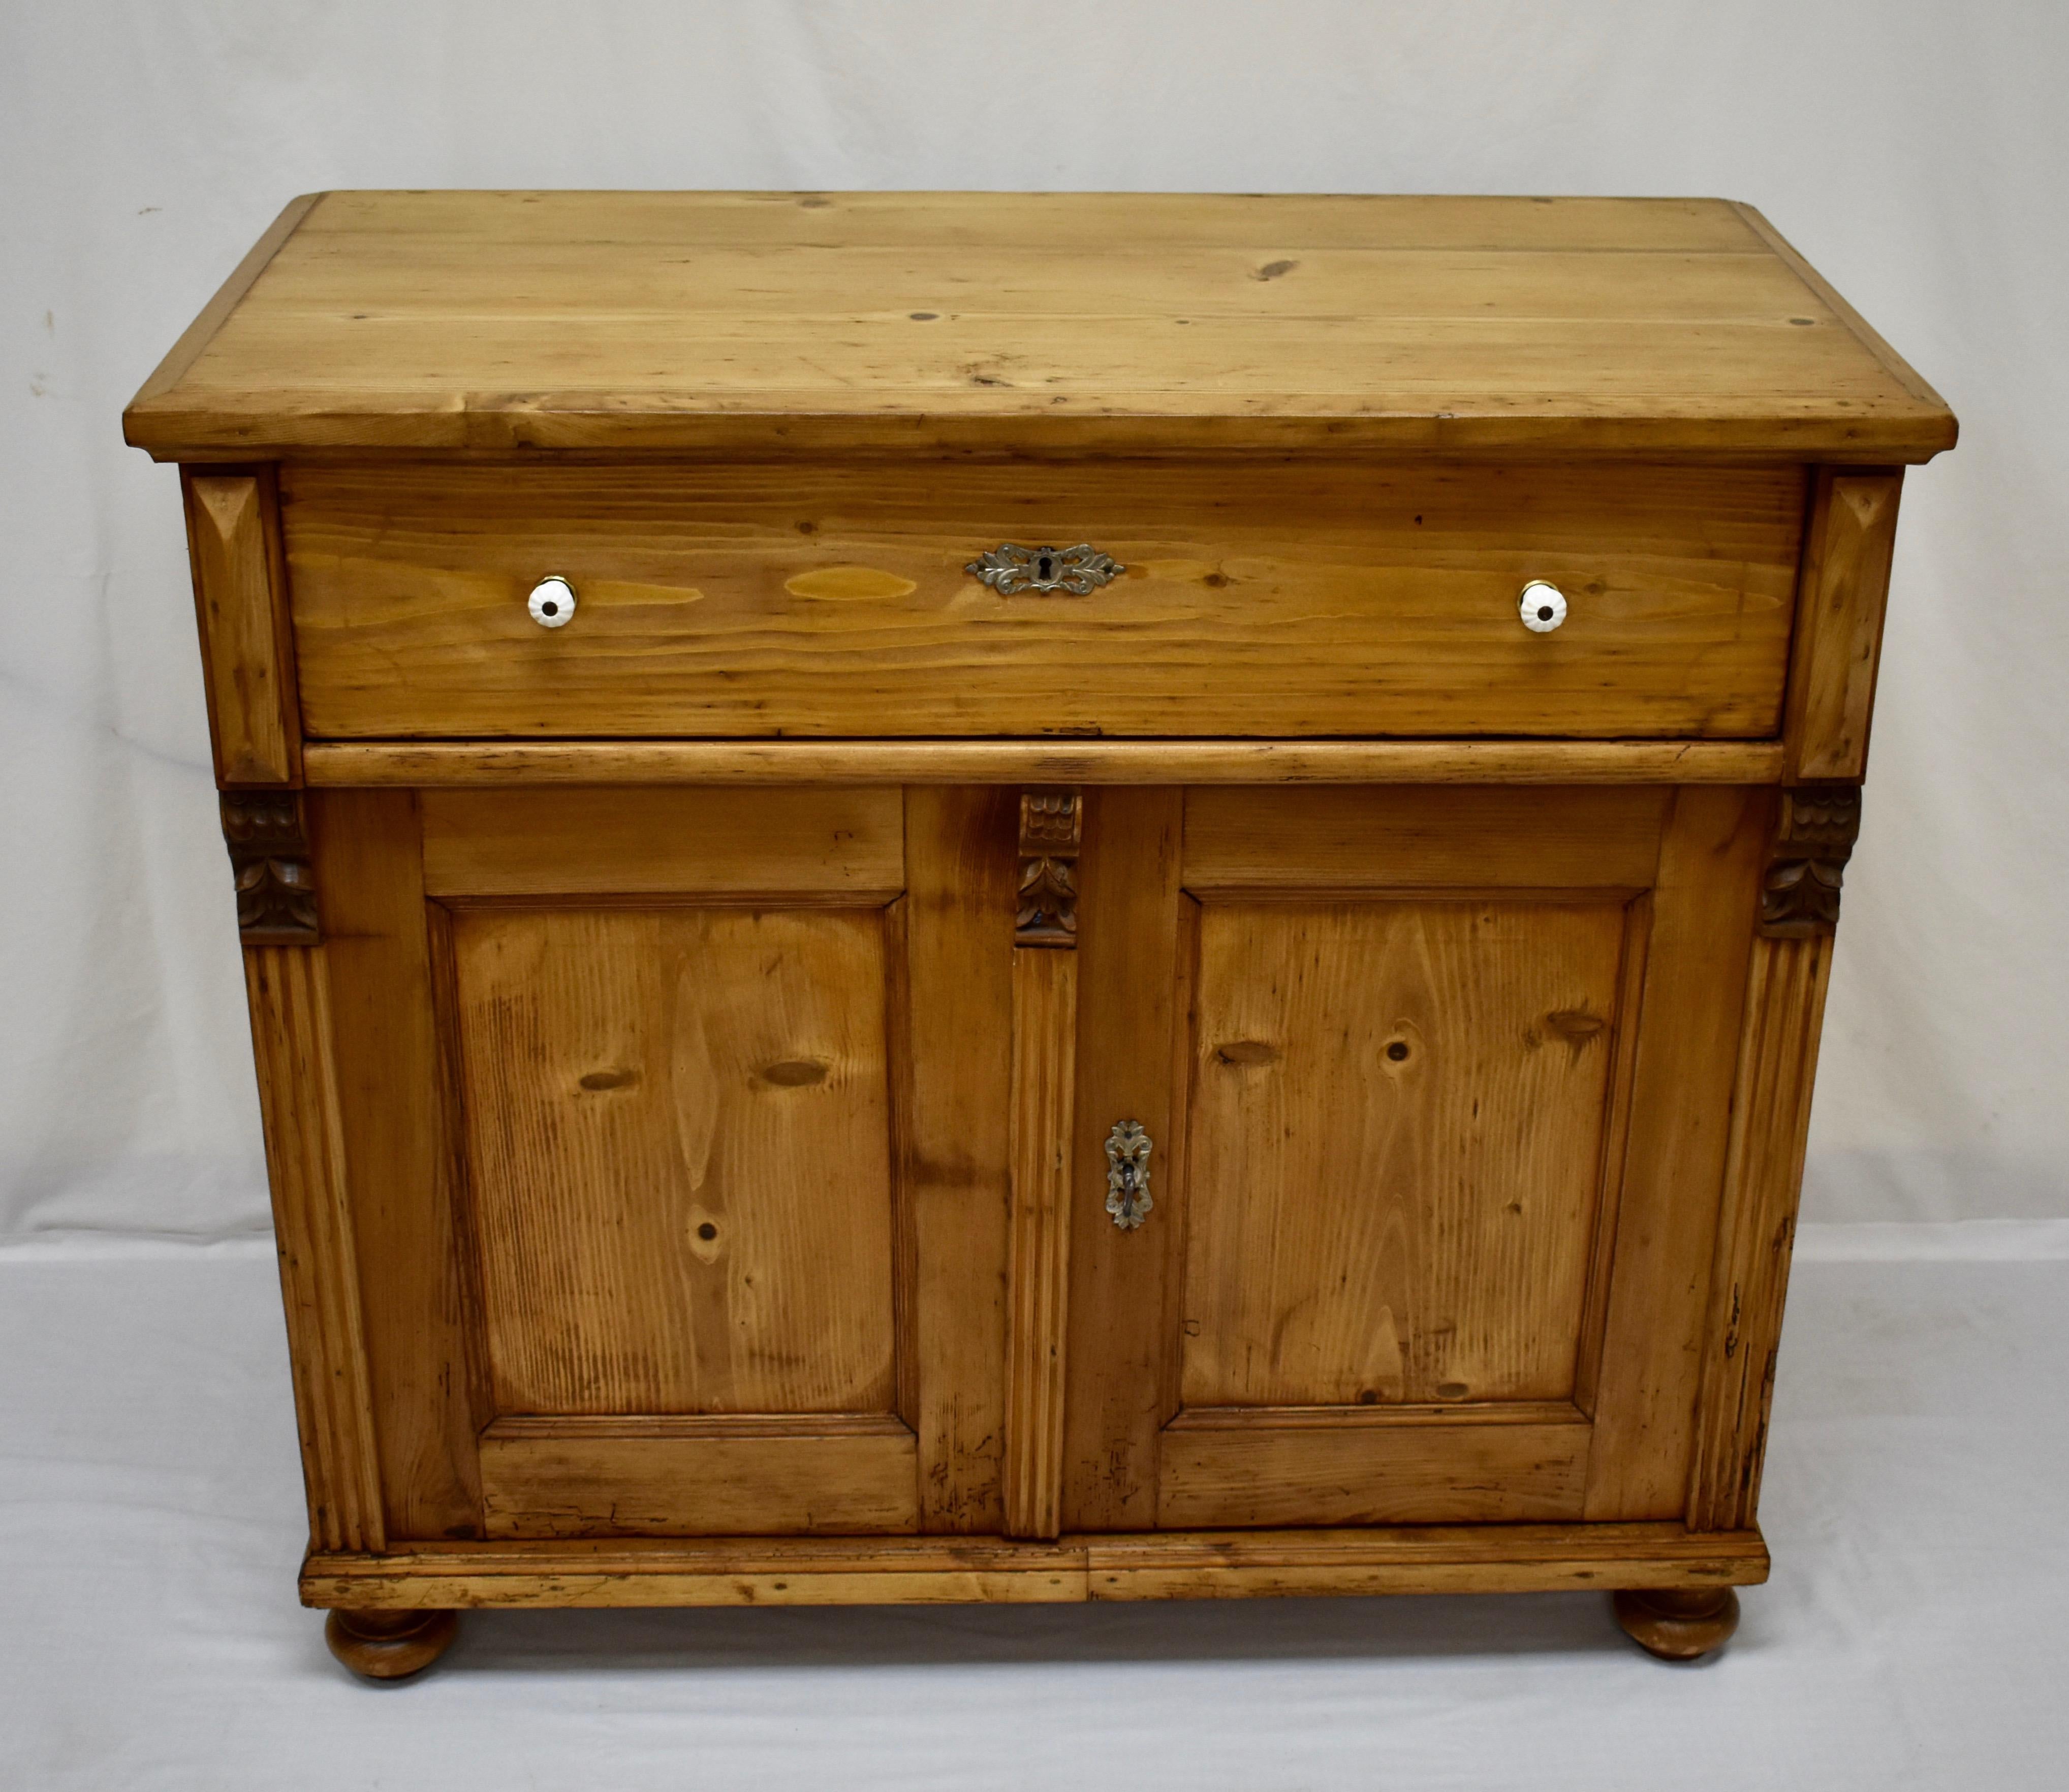 This handsome dresser base has a two board top trimmed with crown molding. A single long hand-cut dovetailed drawer with original ceramic knobs sits above two flat paneled doors, flanked and separated by fluting and oak corbels. The doors open on